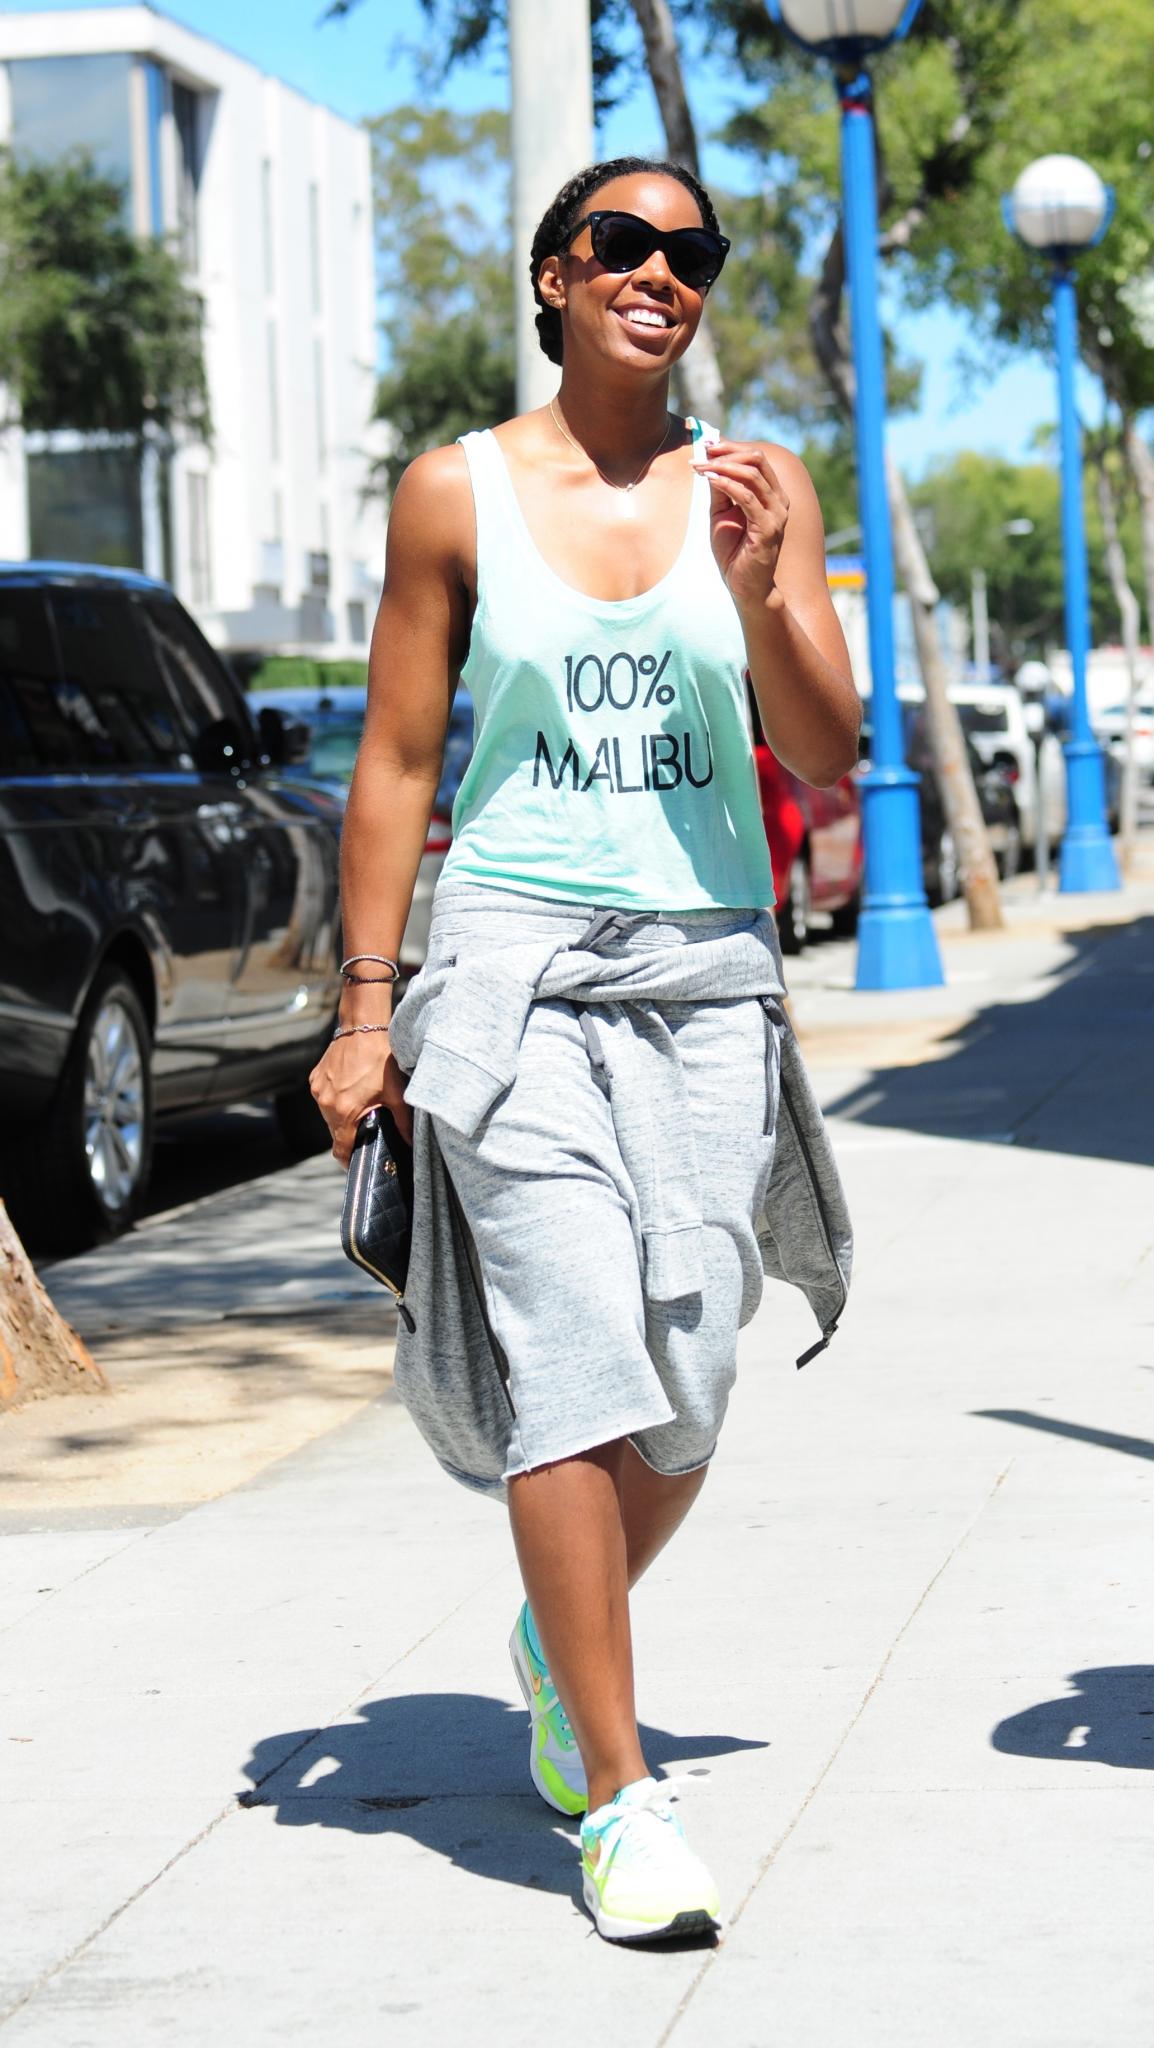 14 Photos That Prove Kelly Rowland’s Sneaker Game is Official